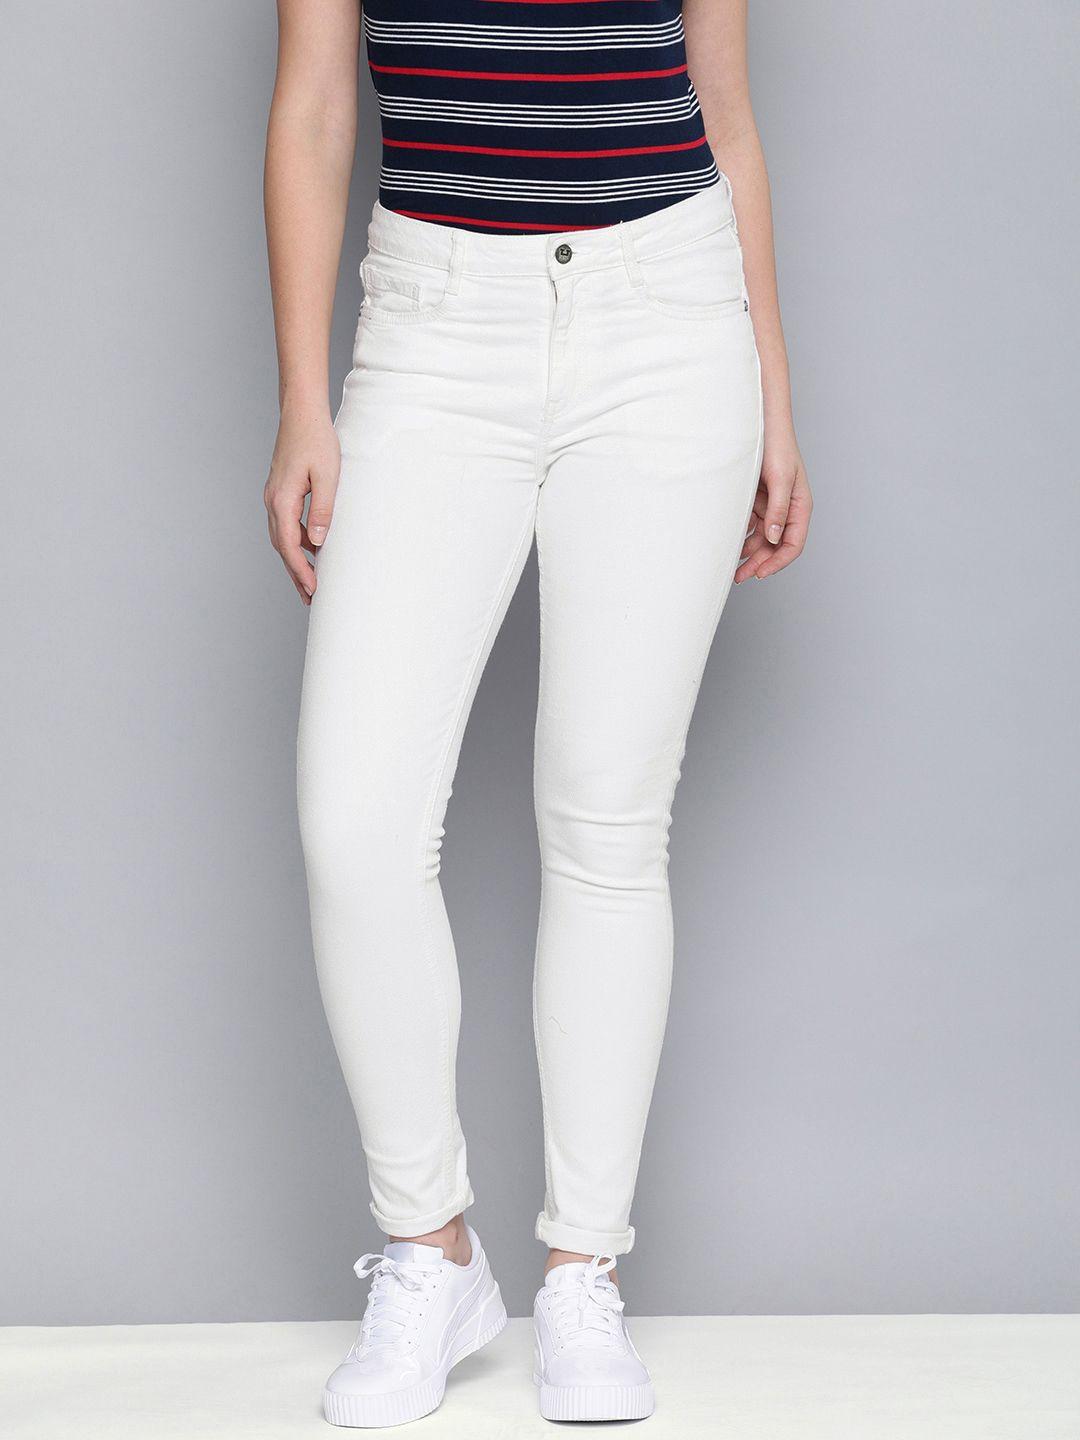 harvard women white skinny fit mid-rise clean look stretchable jeans